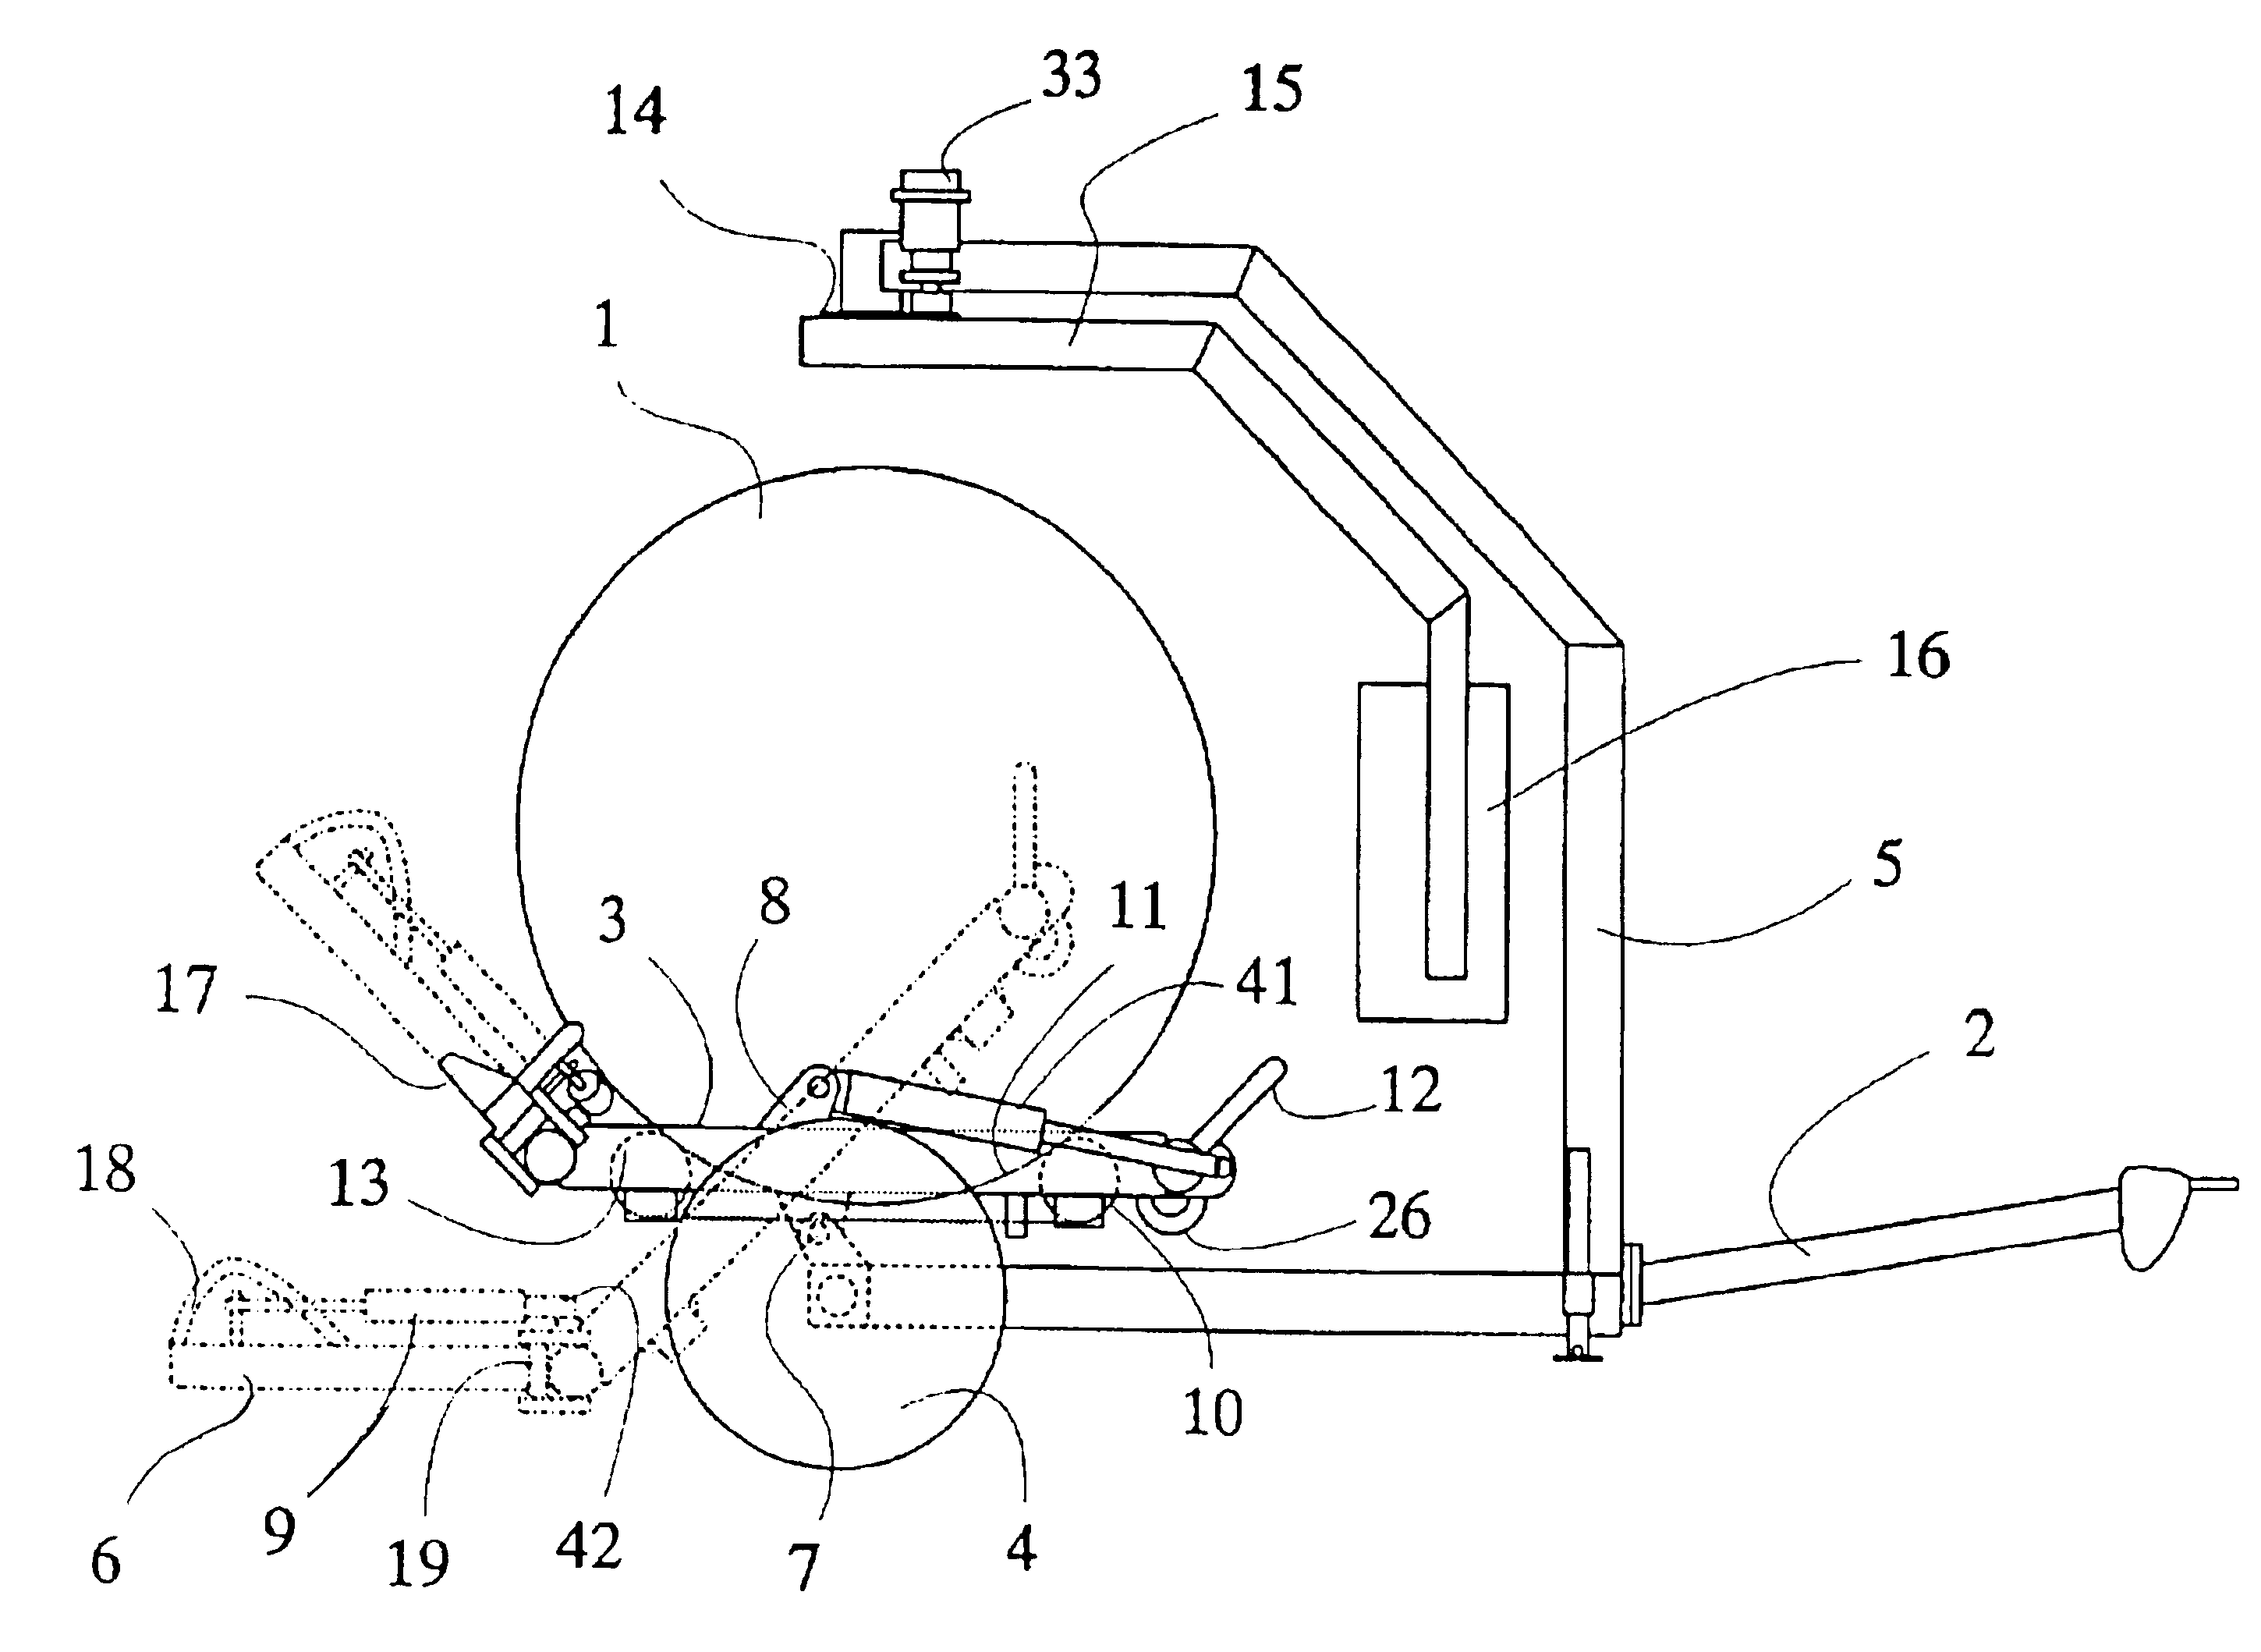 Procedure and apparatus for wrapping a fodder bale with plastic